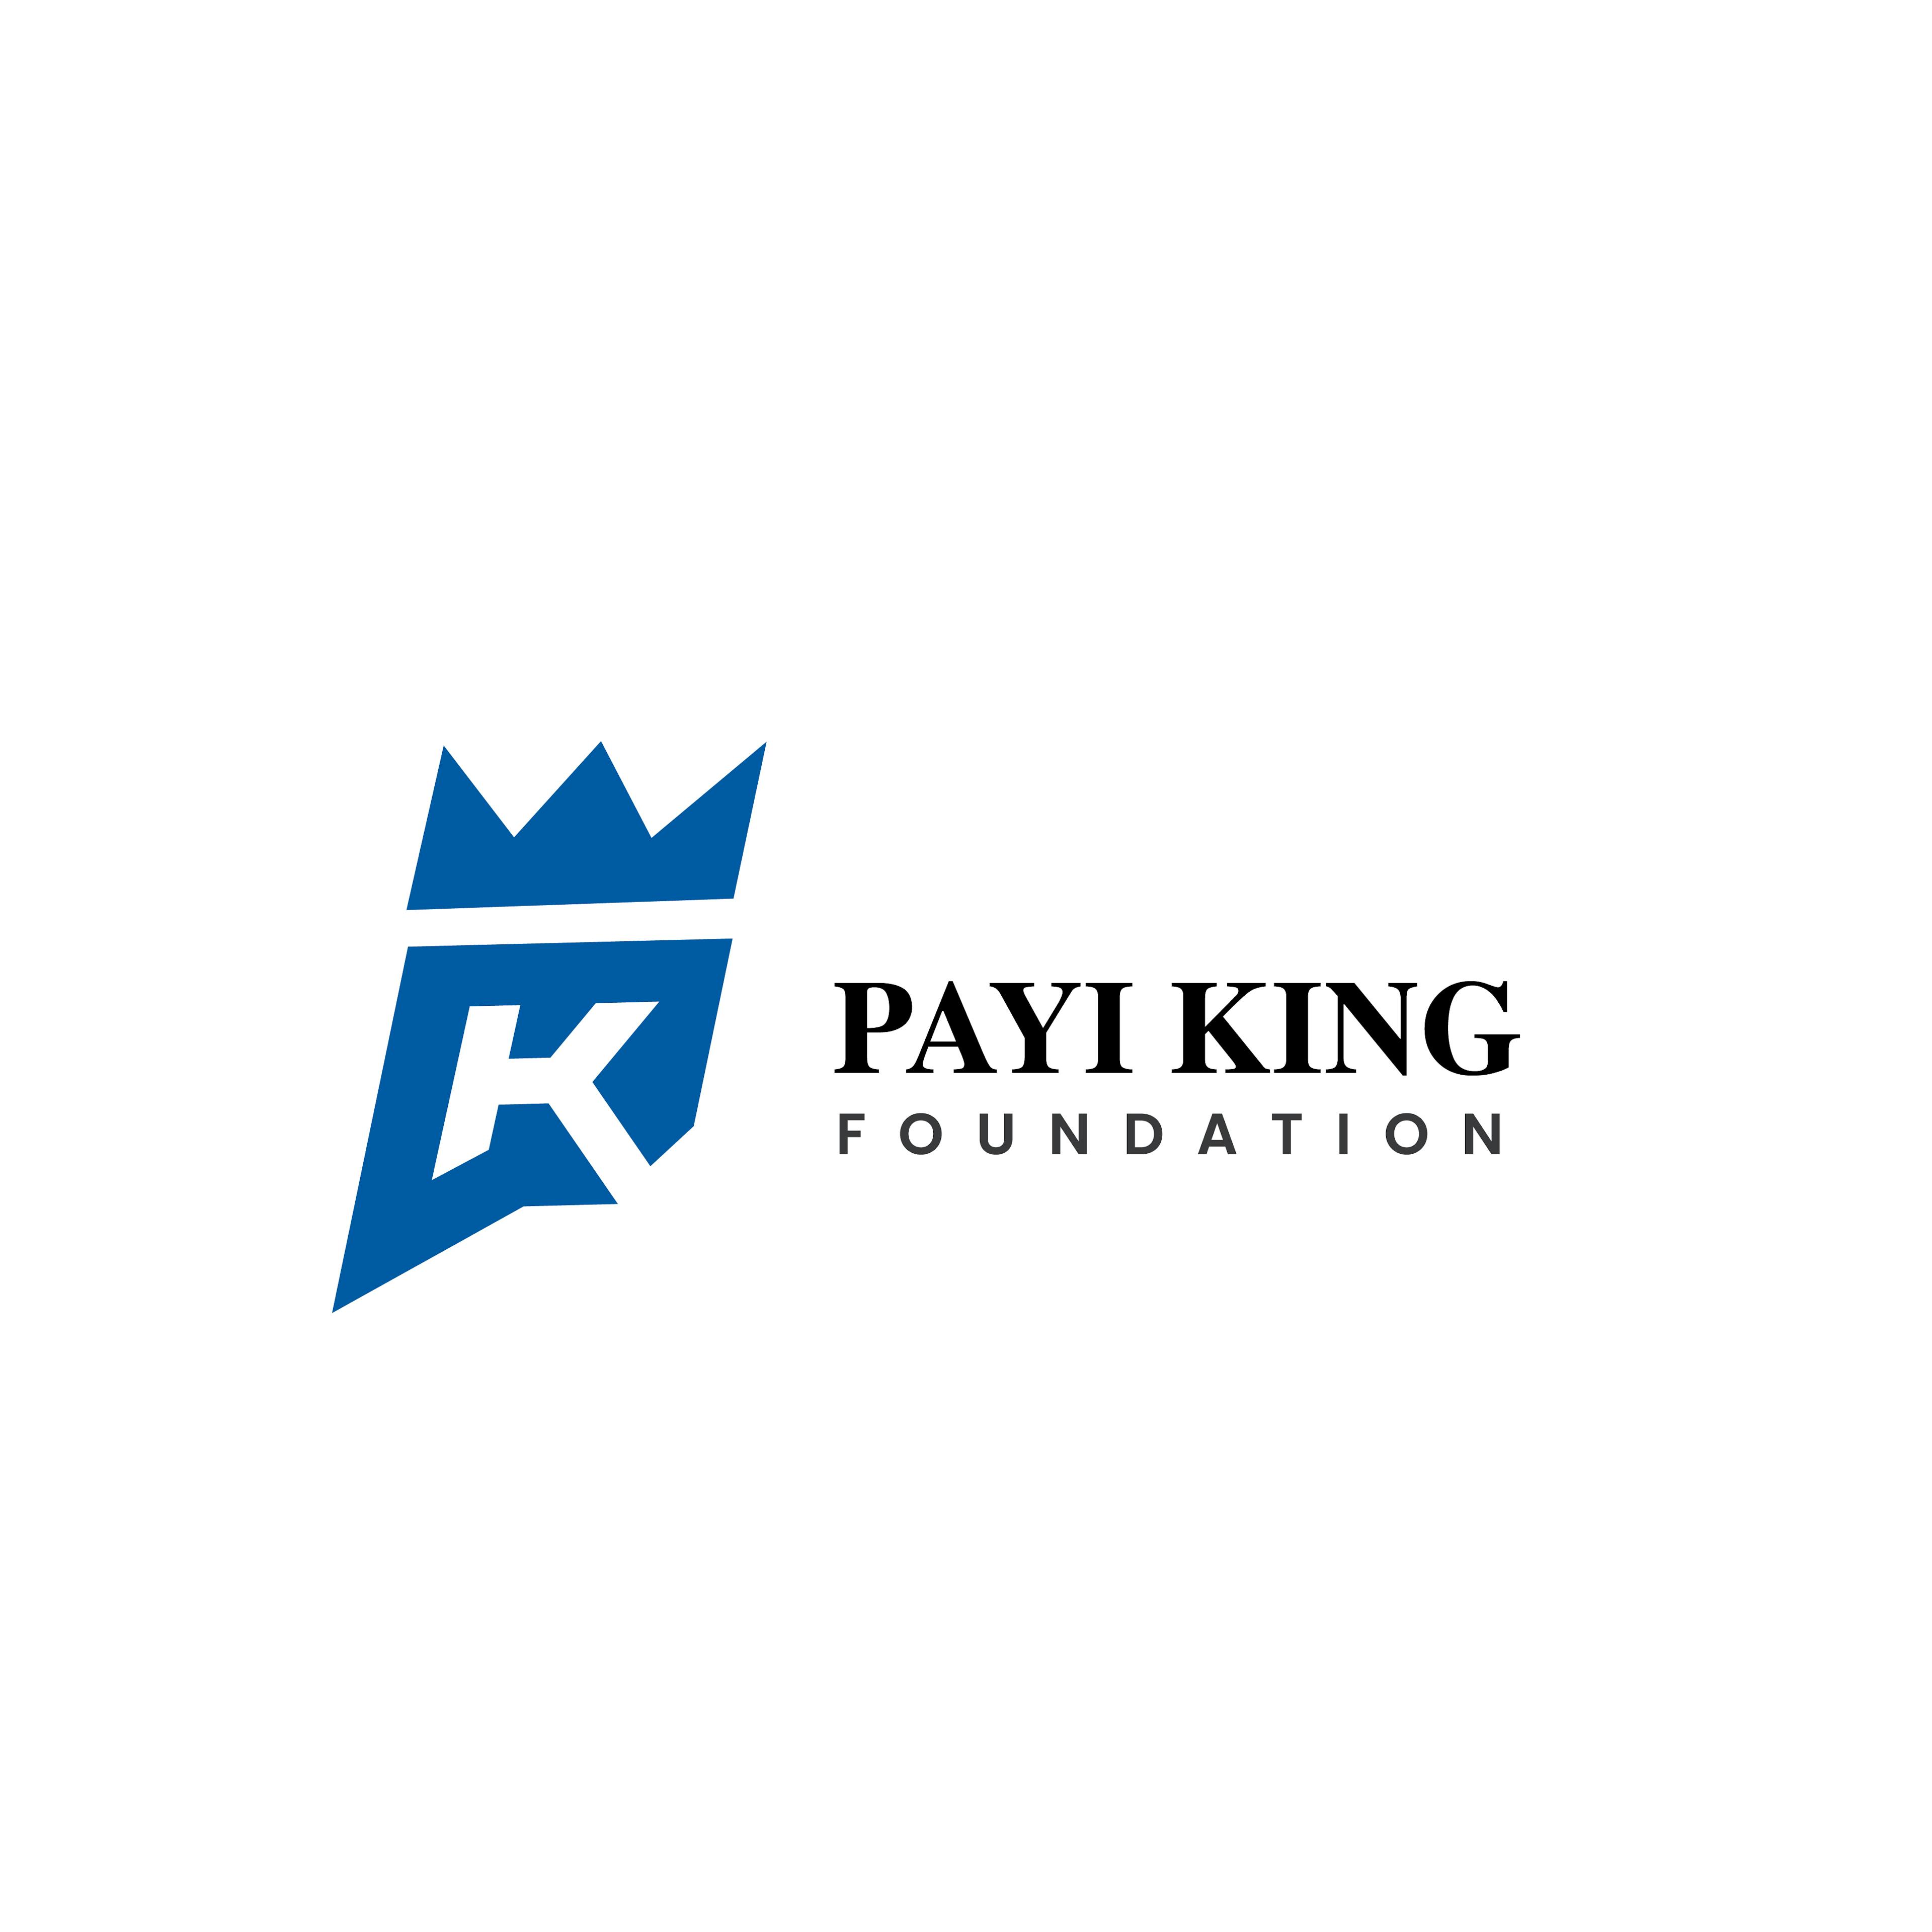 Pay King Foundation